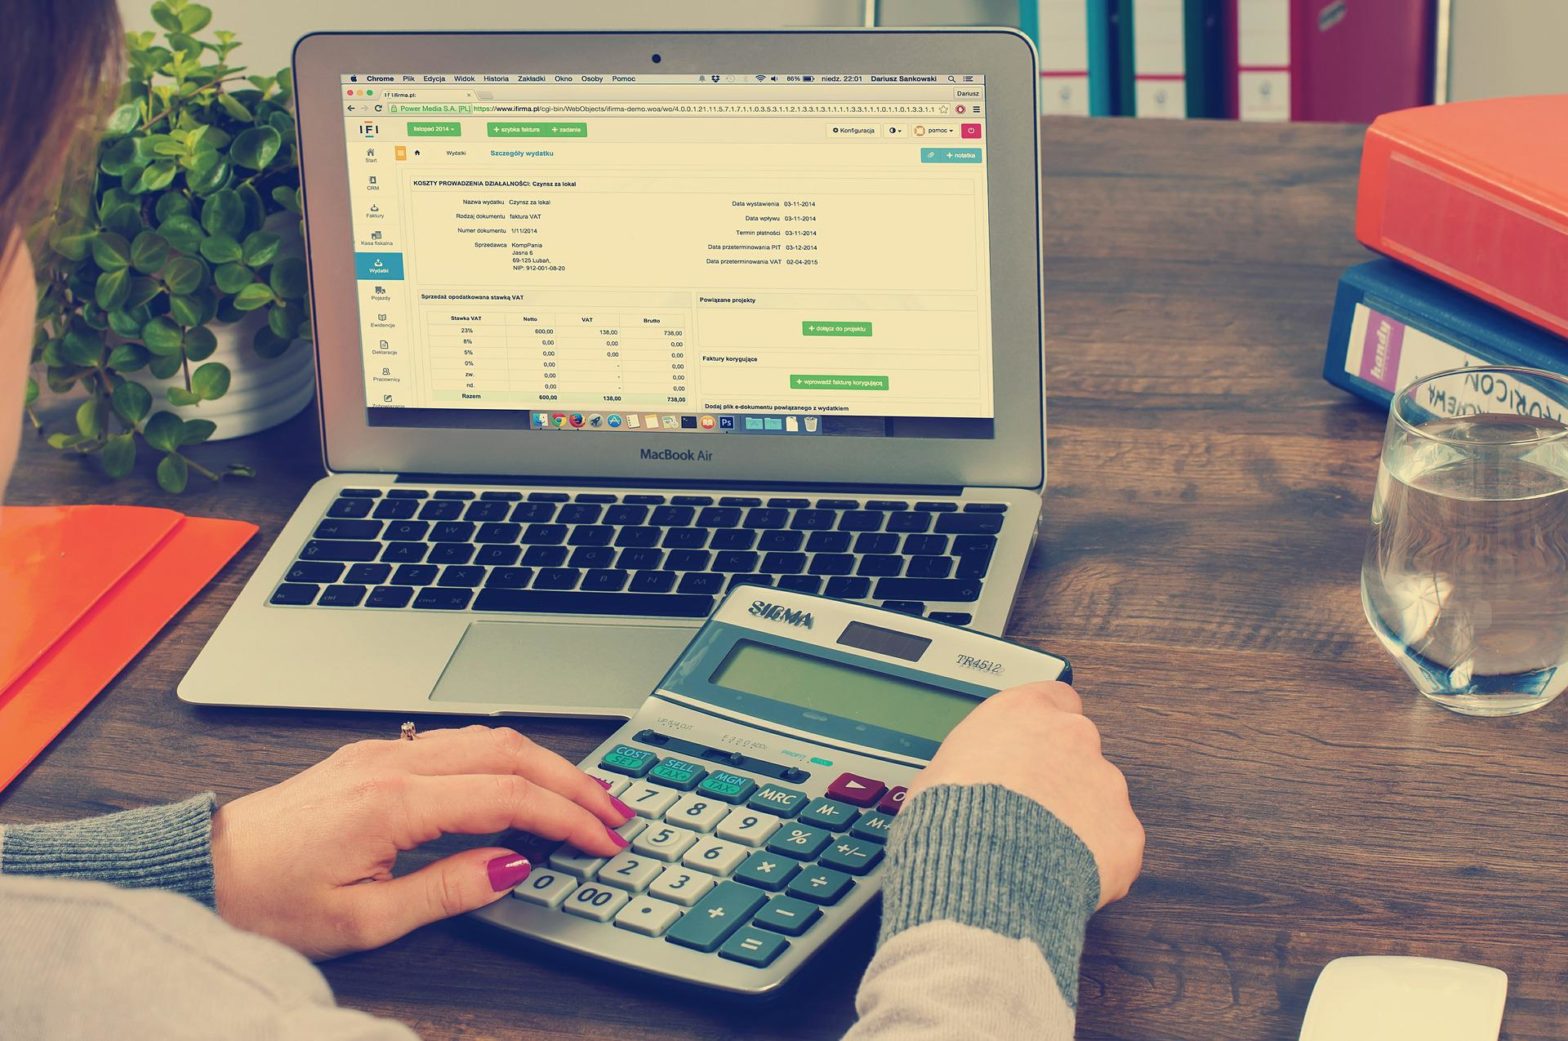 A woman offering online bookkeeping services with her calculator and laptop.